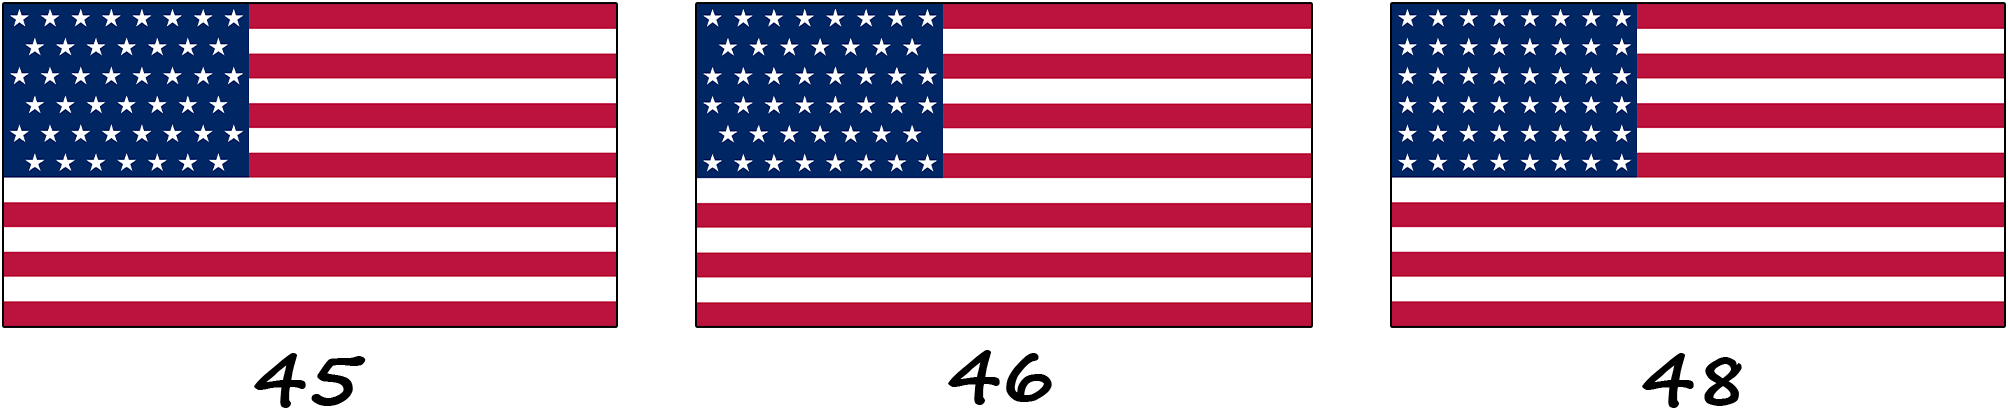 The flag of Puerto Rico during American rule